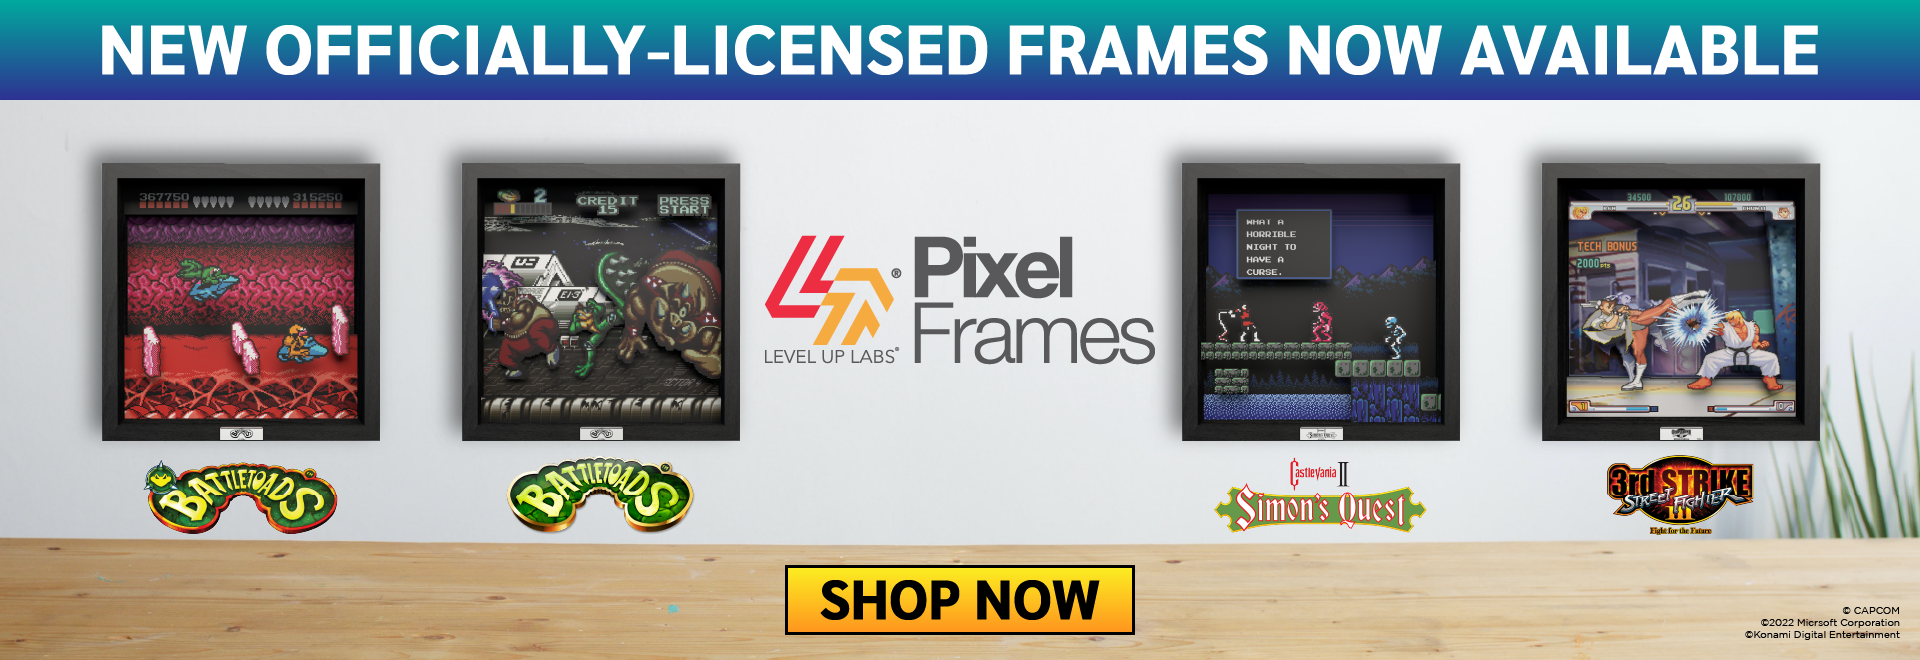 NEW Pixel Frames now available!